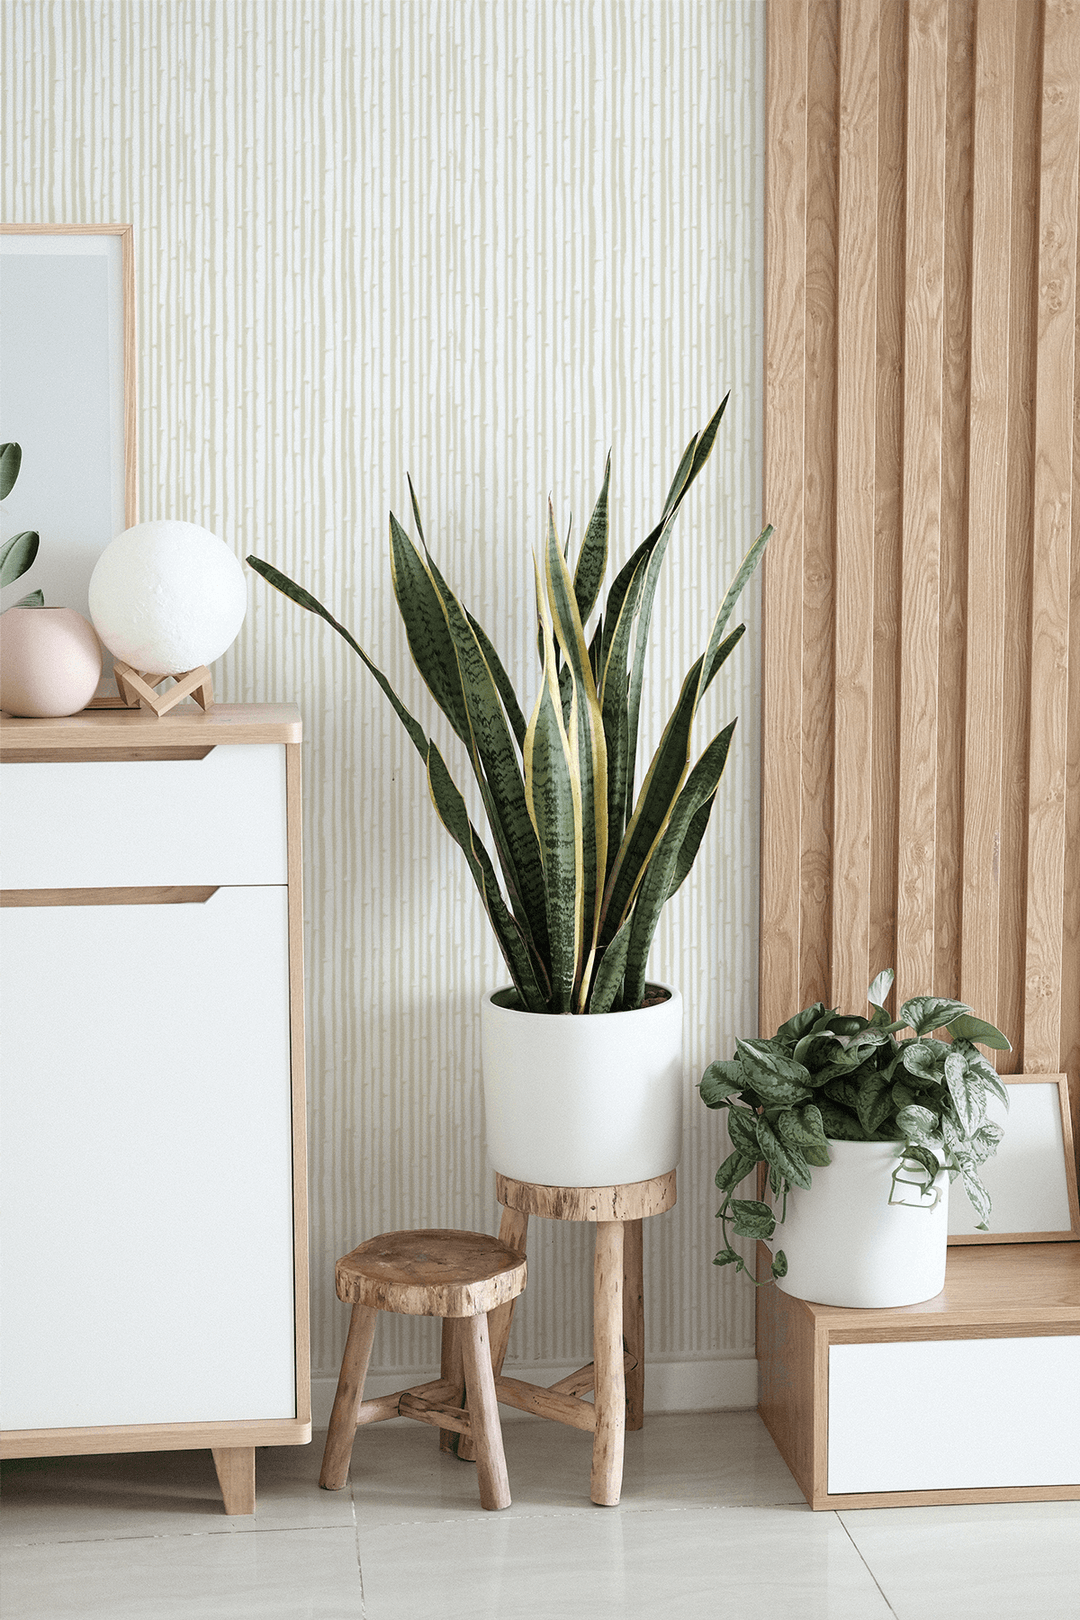 Bamboo in Bone Wallpaper by MUSE Wall Studio